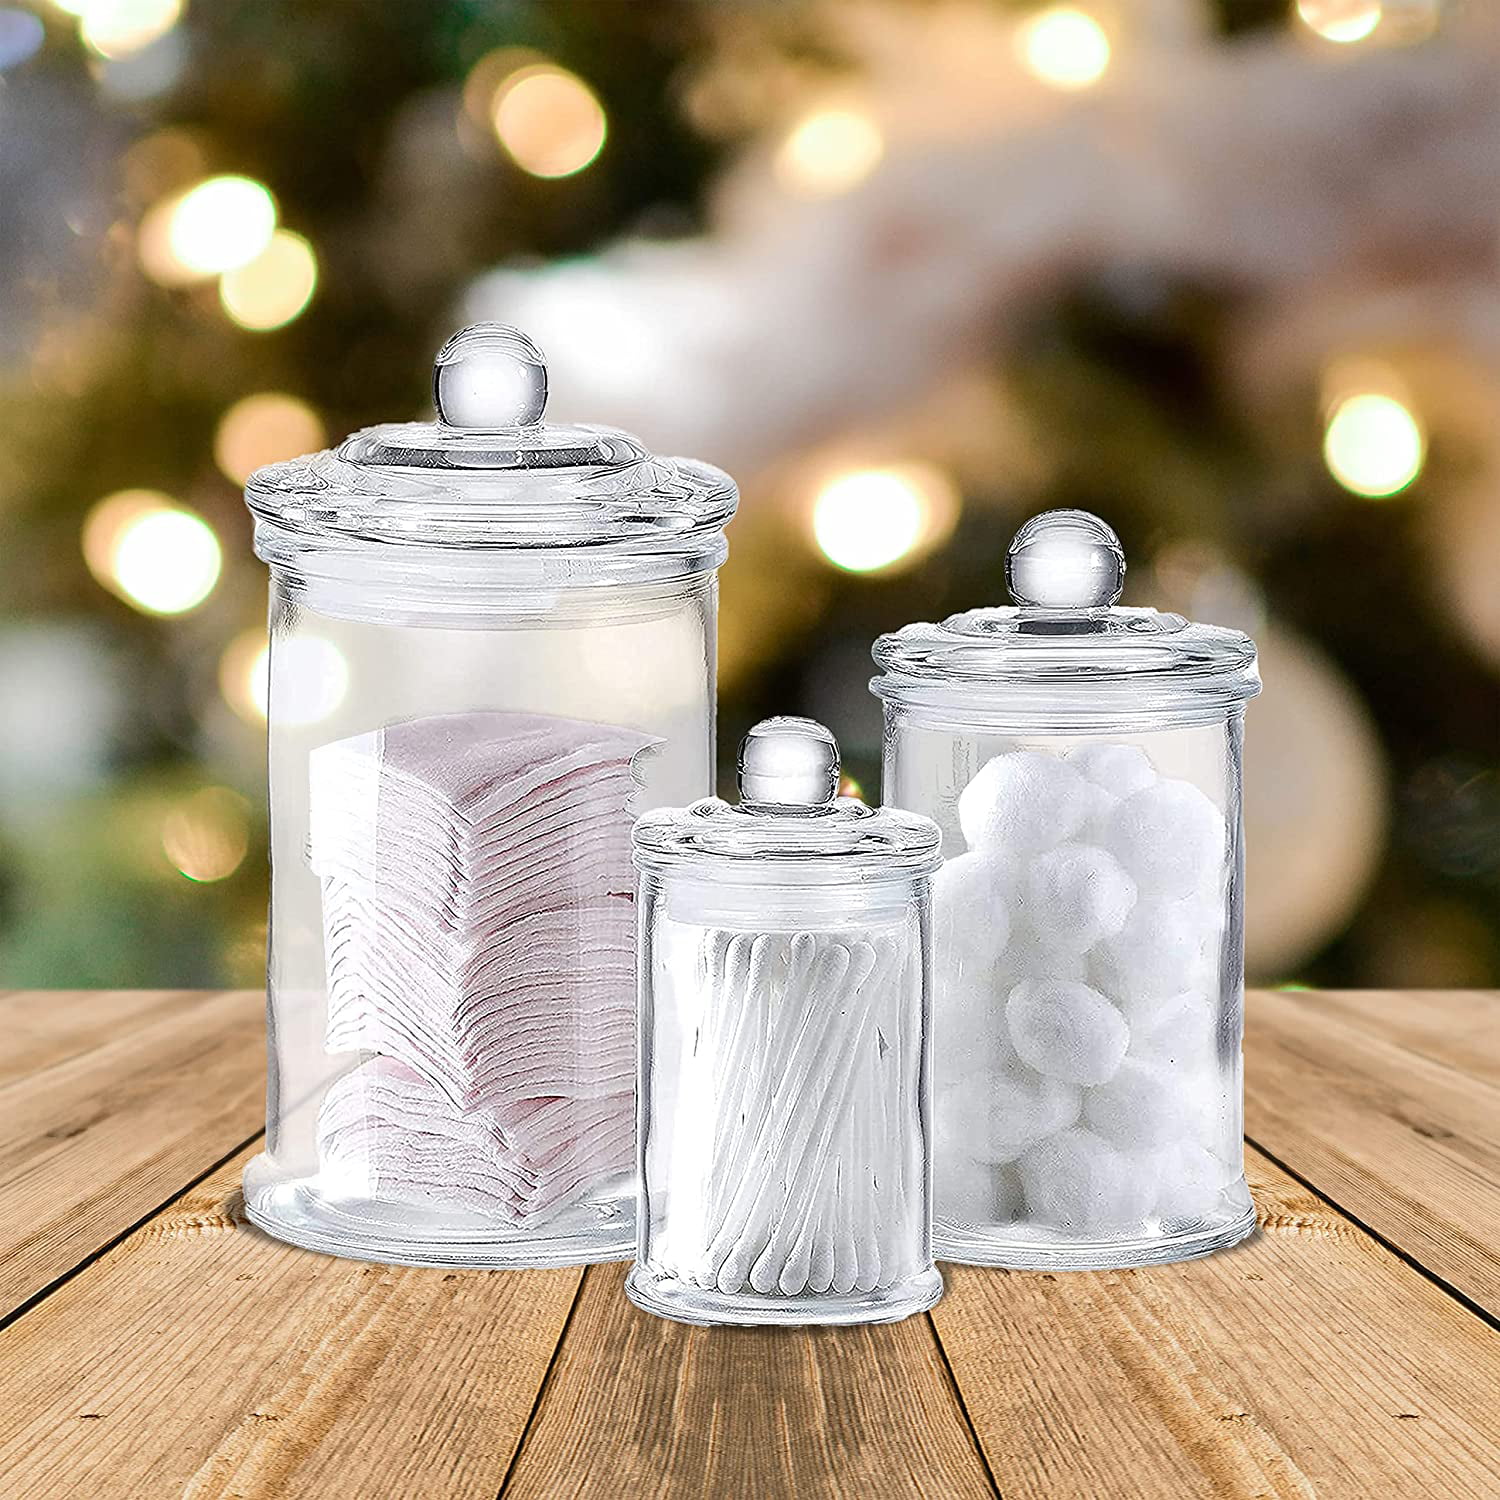 Whole Housewares | Set of 3 Bathroom Canisters - Storage Container Jars -  Premium Glass Apothecary Jars with Lids - Small Glass Jars for Kitchen or